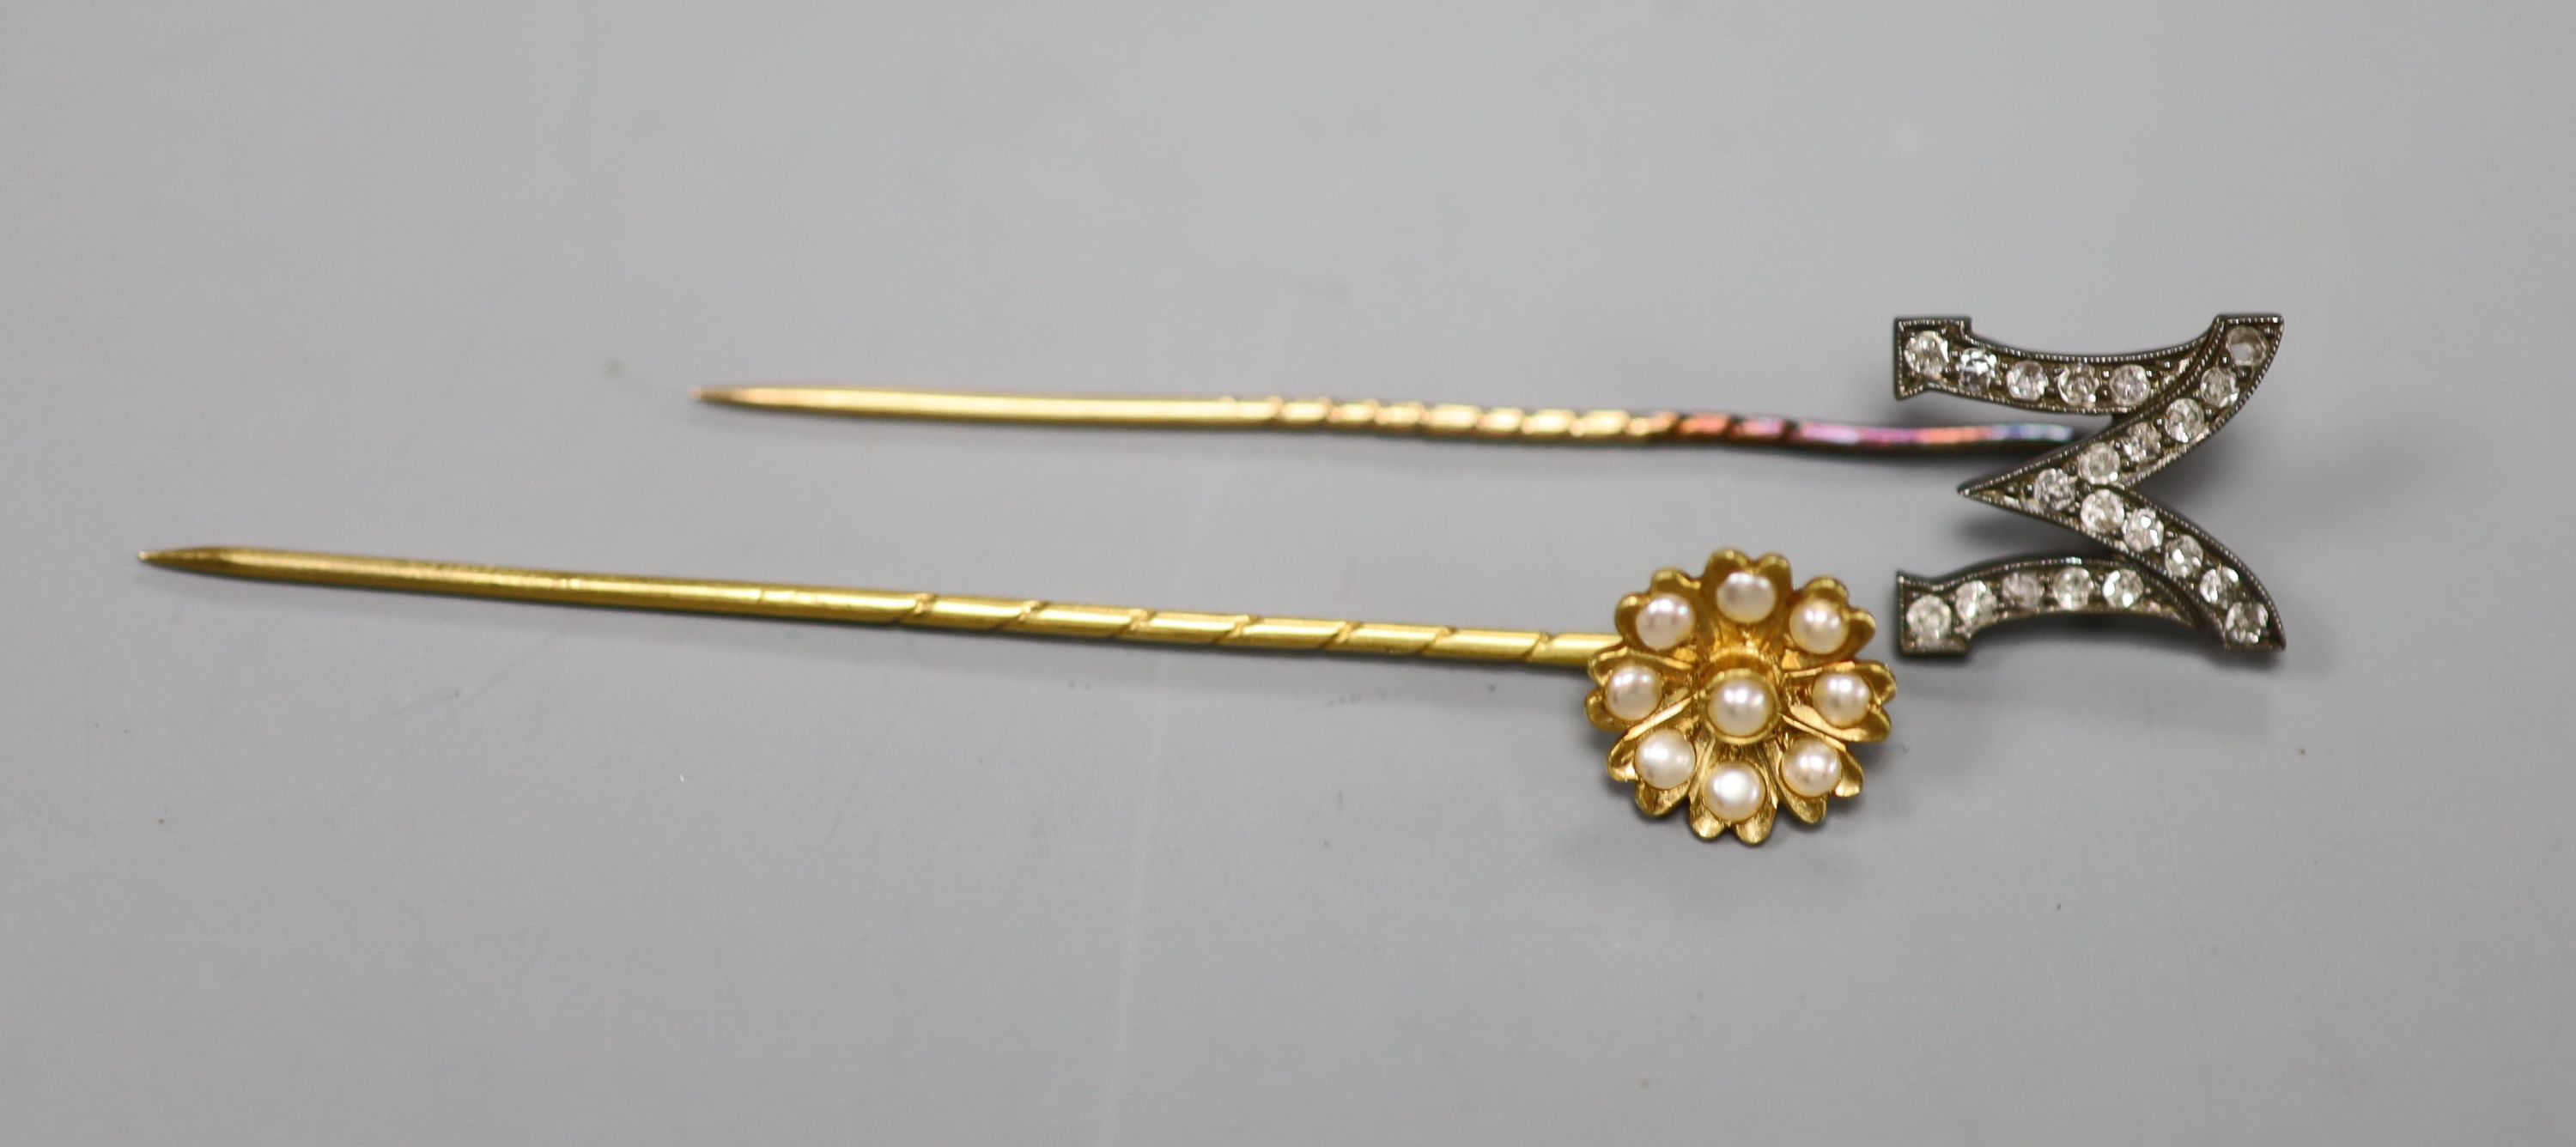 An early 20th century yellow metal and rose cut diamond set M stick pin, 58mm, gross 1.8 grams & 1 other stick pin.